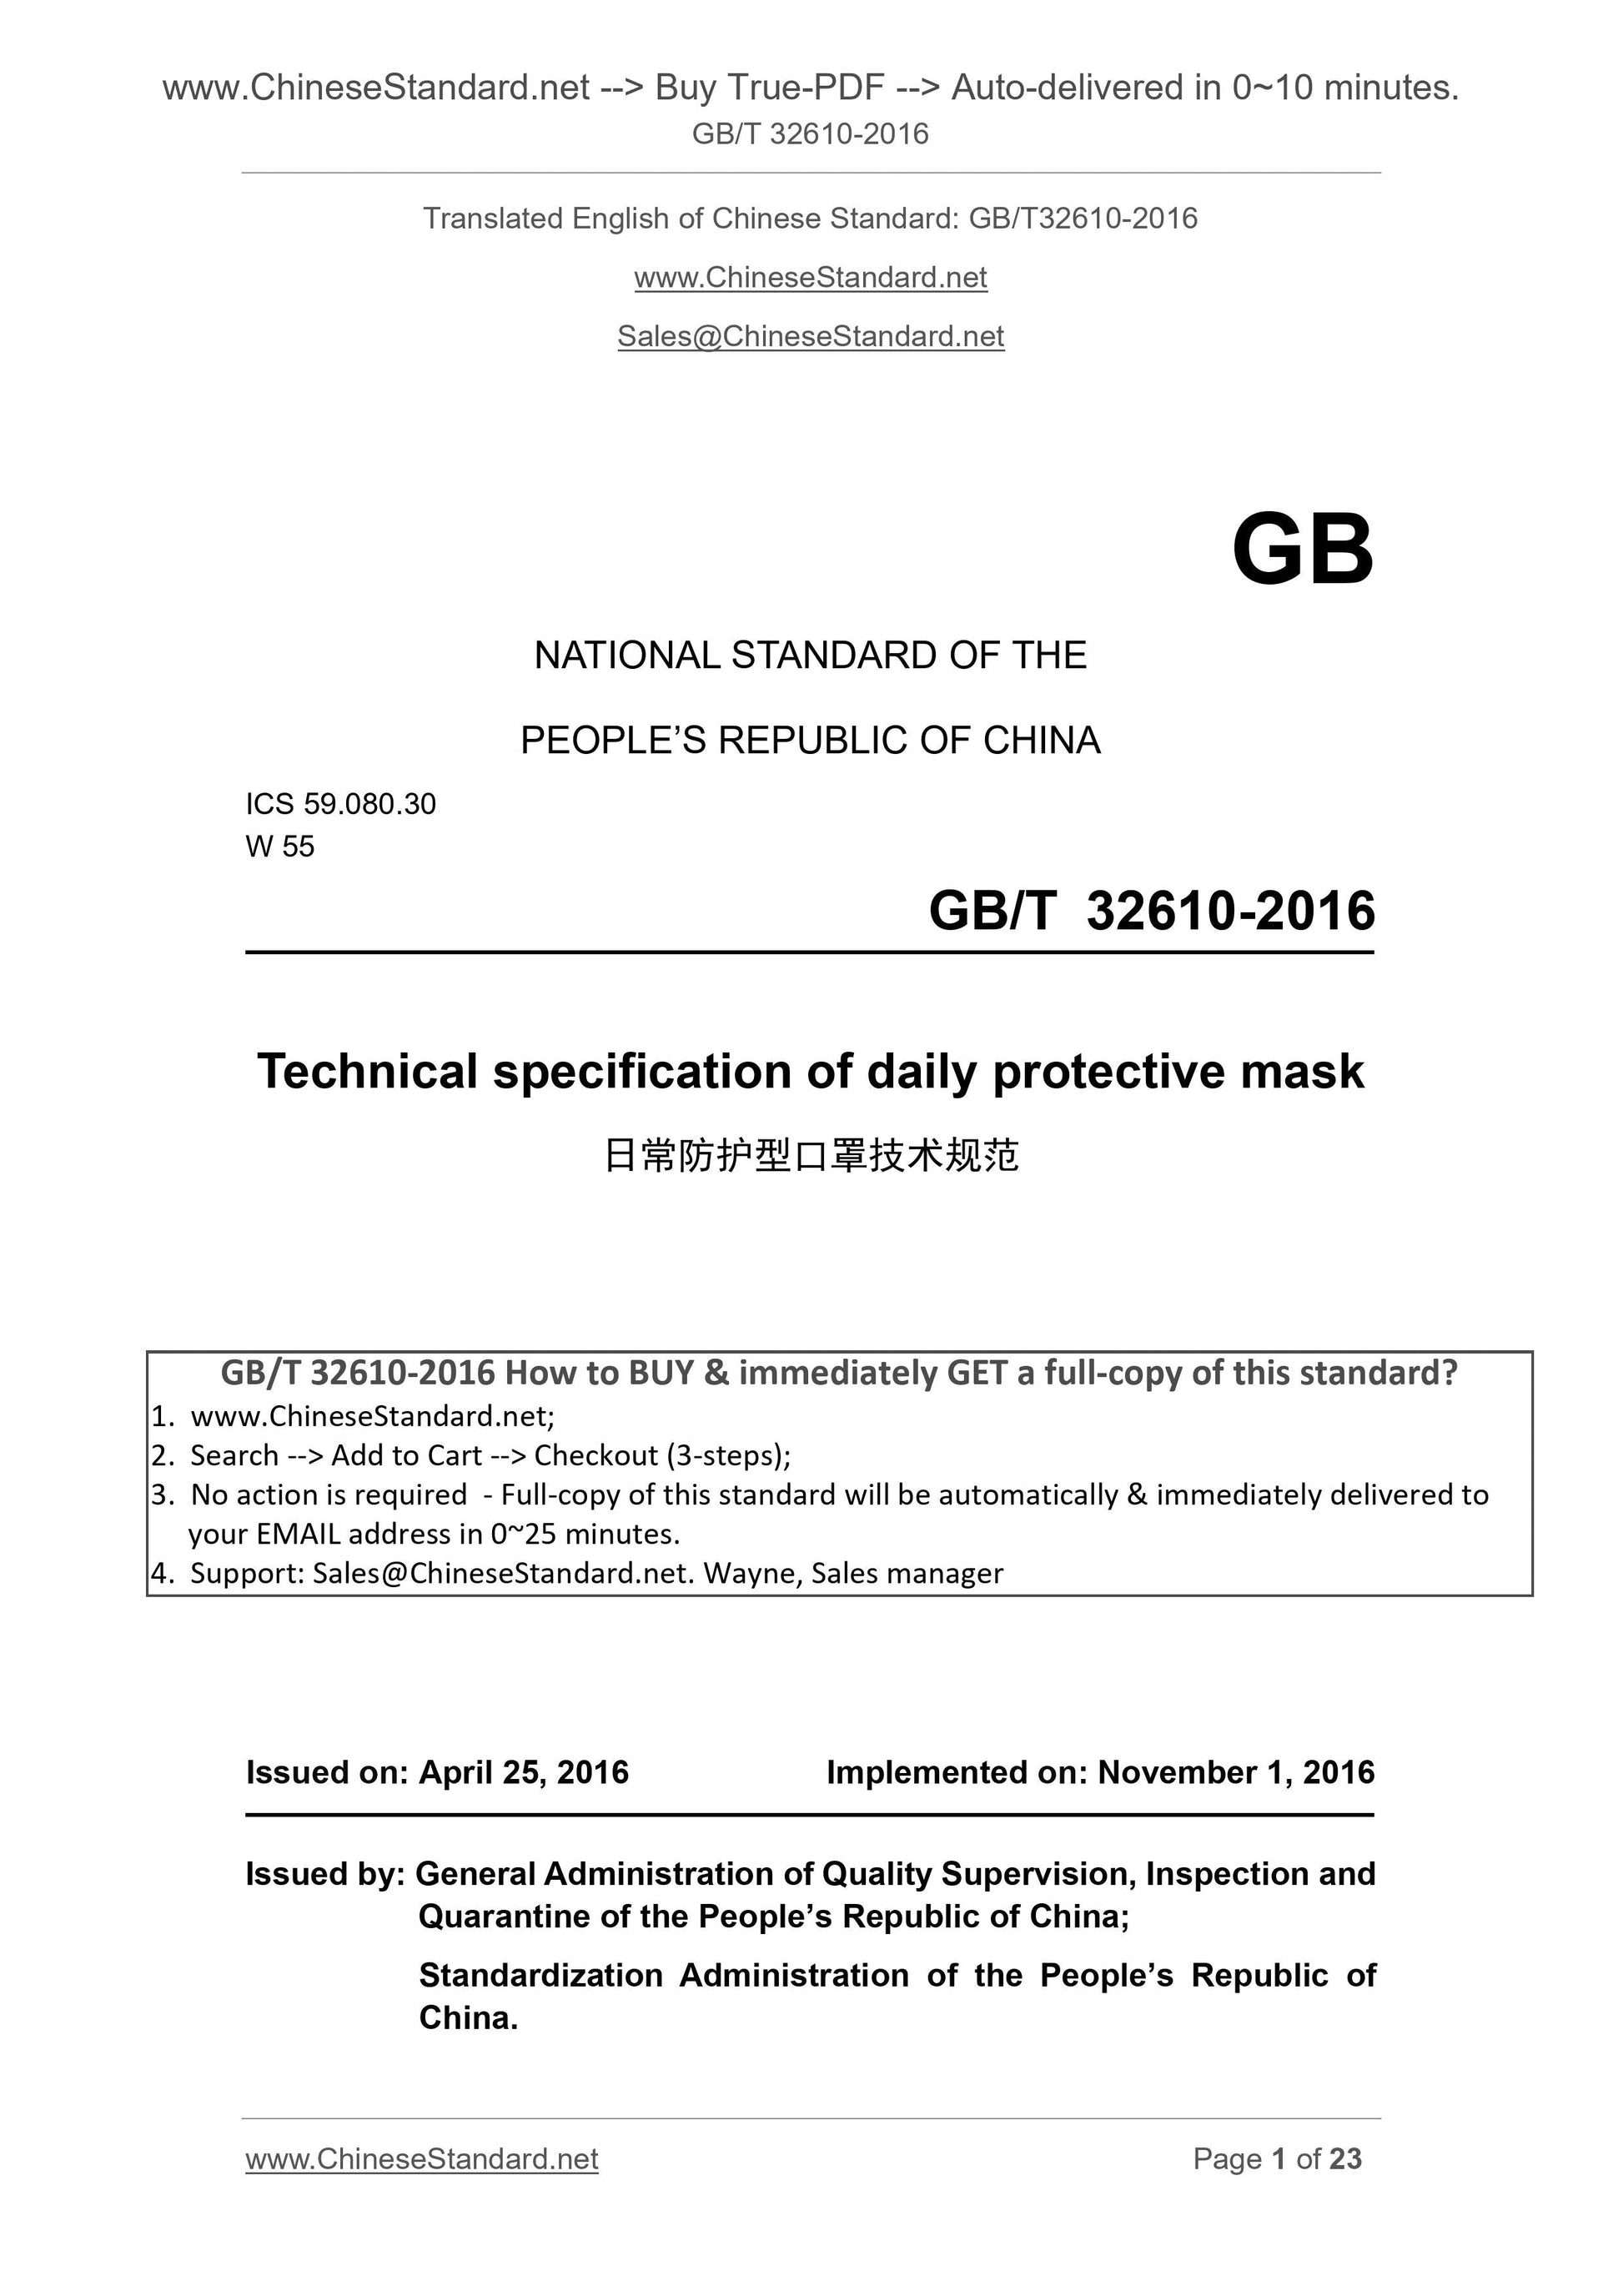 GB/T 32610-2016 Page 1